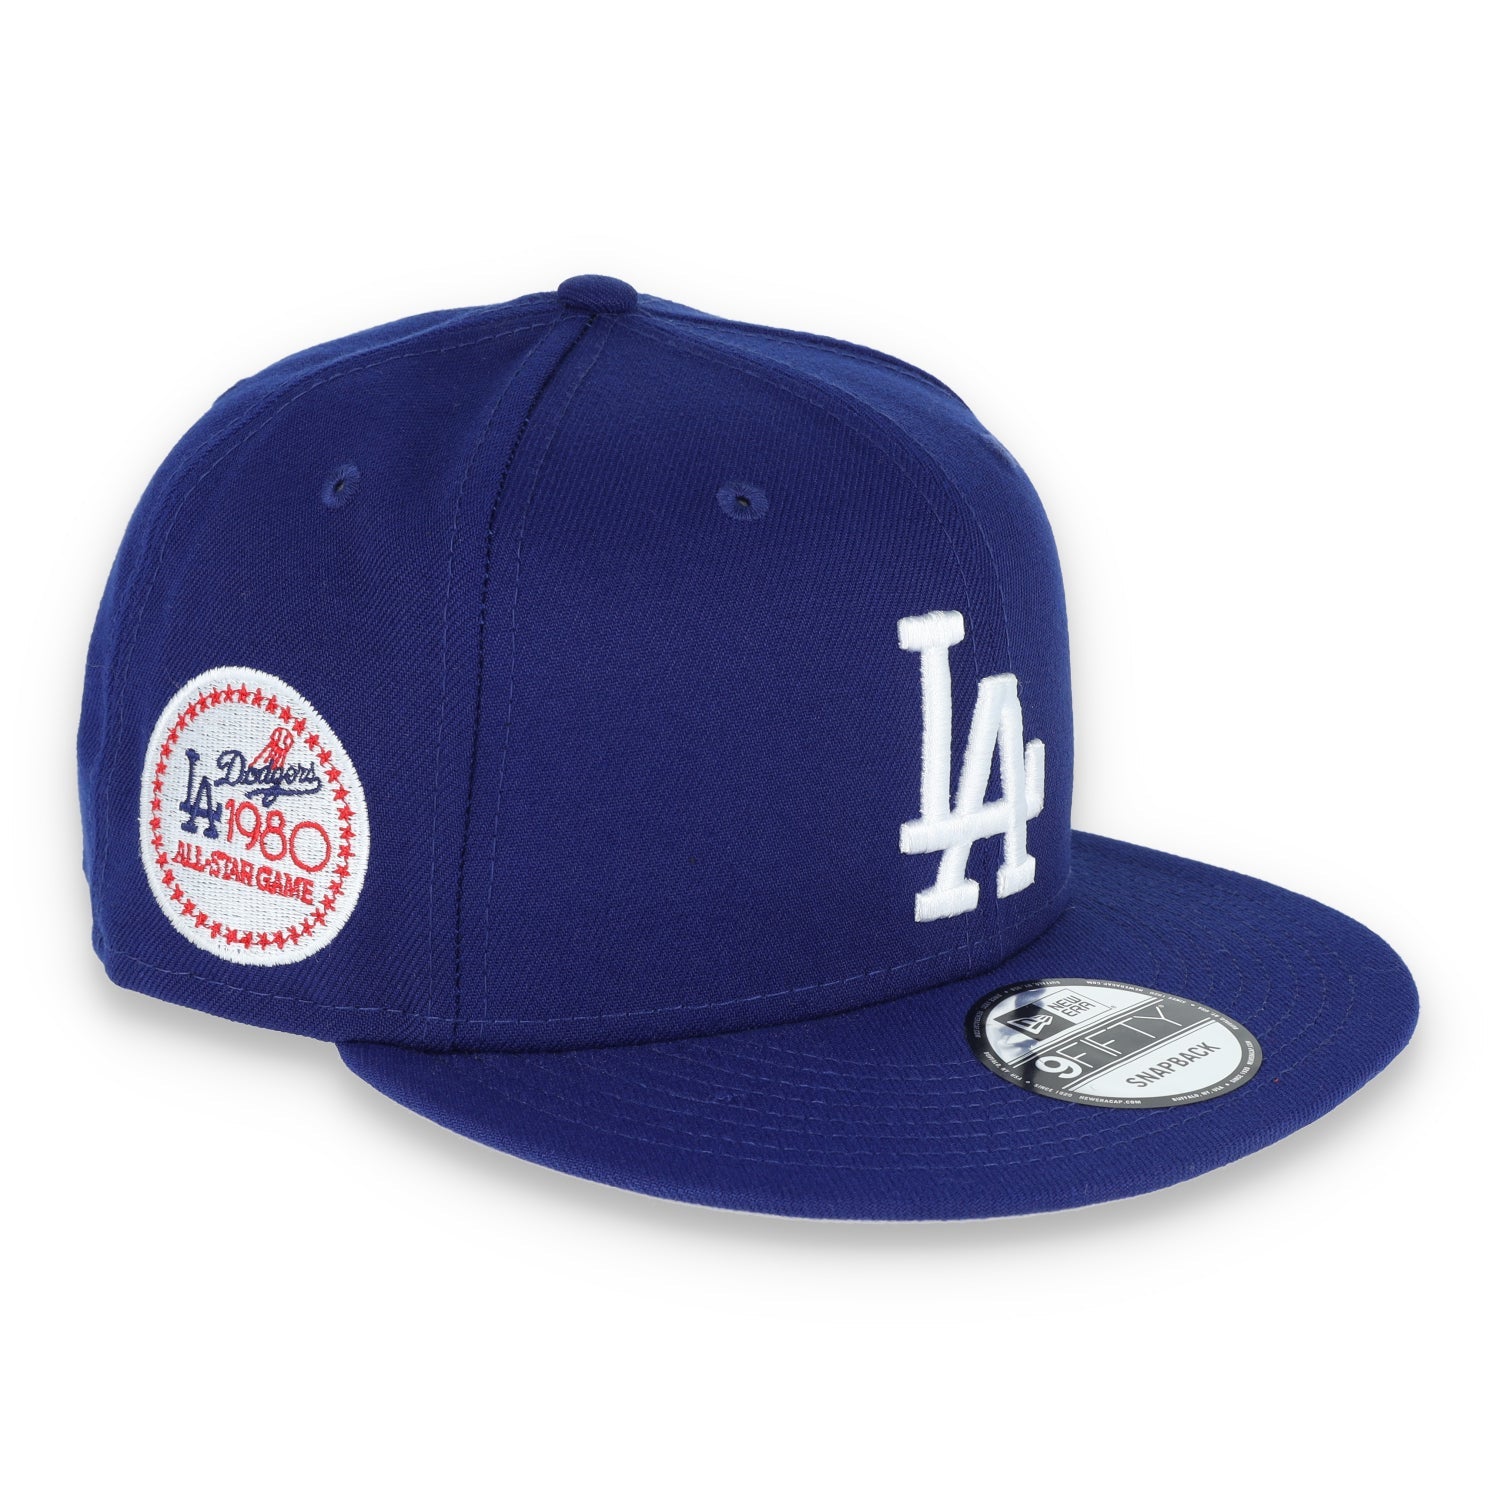 New Era Los Angeles Dodgers All-Star Patch 9FIFTY Snapback-Blue